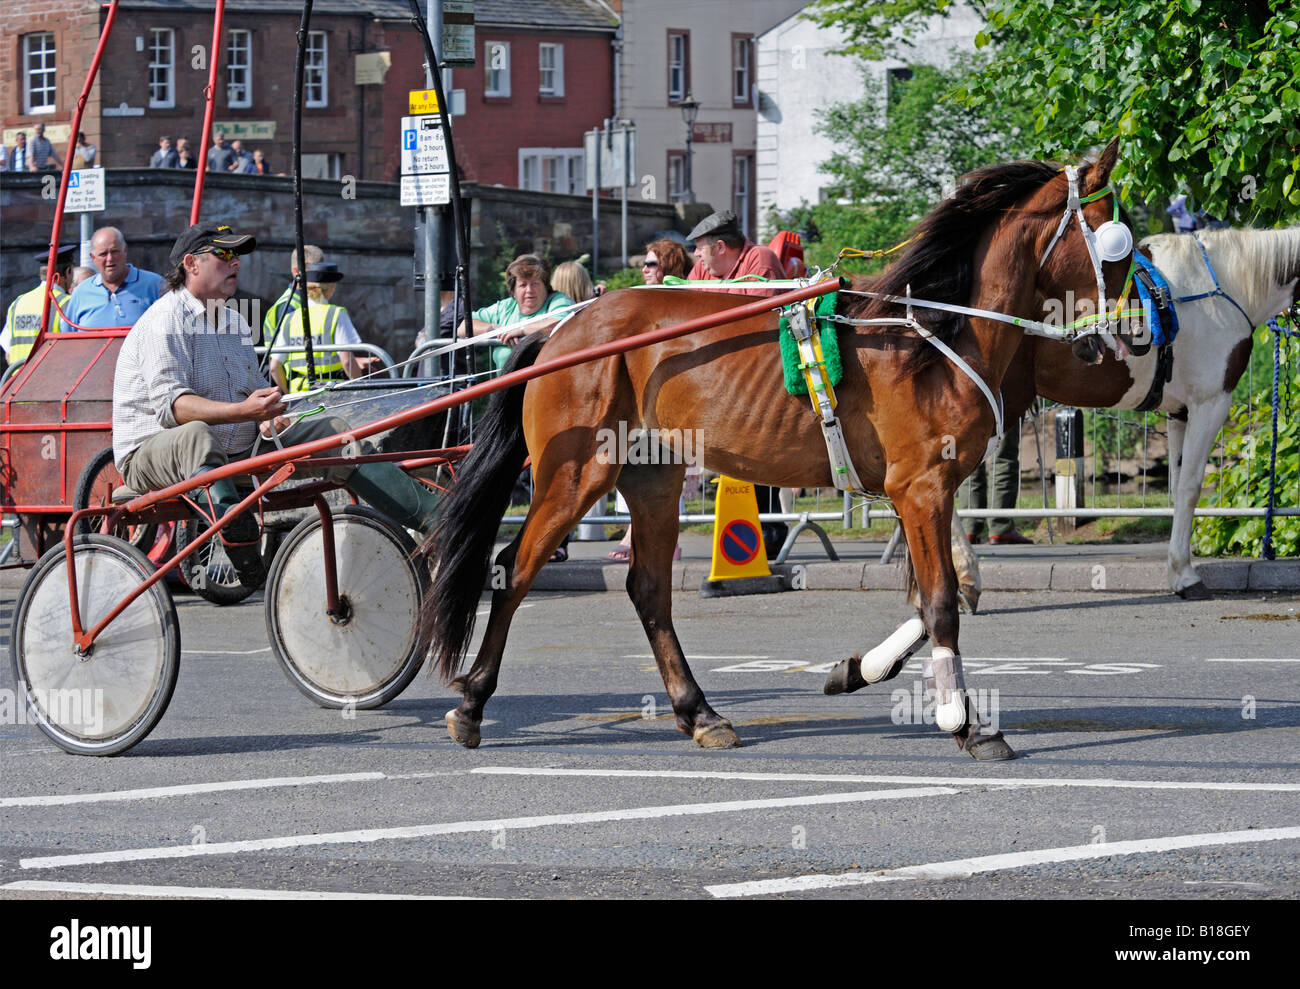 Gypsy traveller with trotting horse and trap. Appleby Horse Fair. Appleby-in-Westmorland, Cumbria, England, United Kingdom. Stock Photo